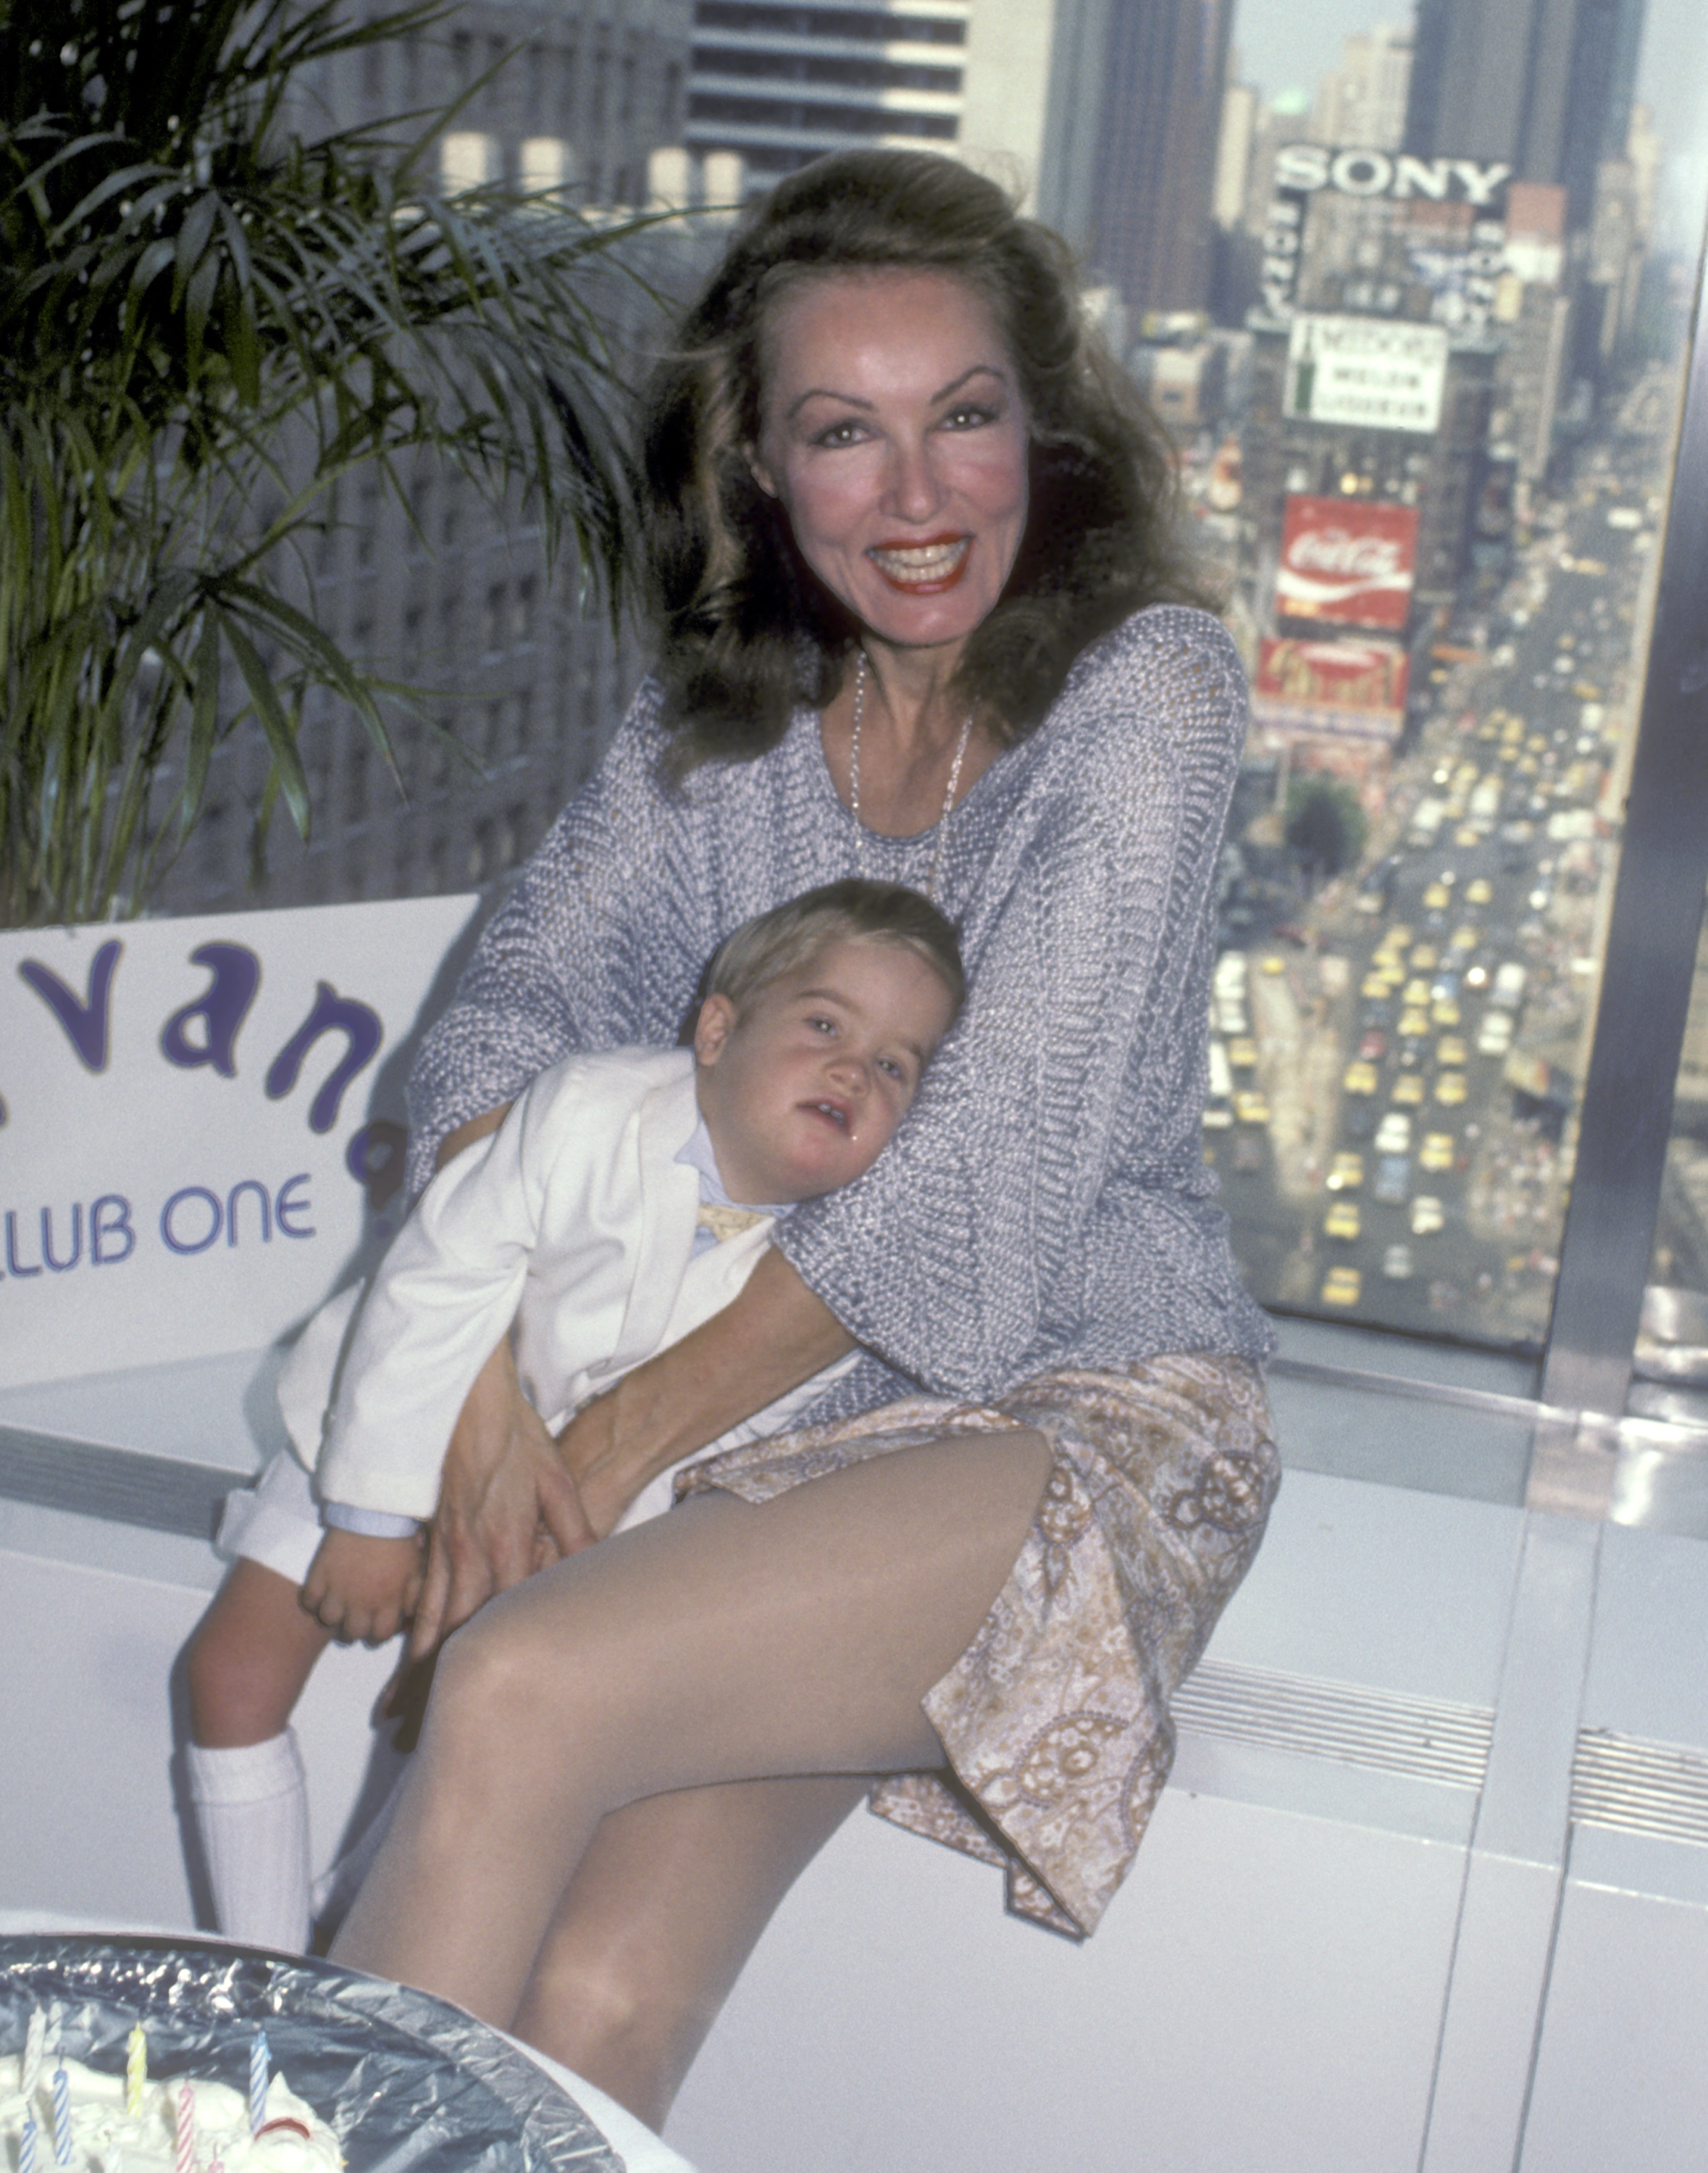 Actress Julie Newmar and son John attend her 51st birthday party on August 16, 1984 at Nirvana Club One in New York City. | Source: Getty Images